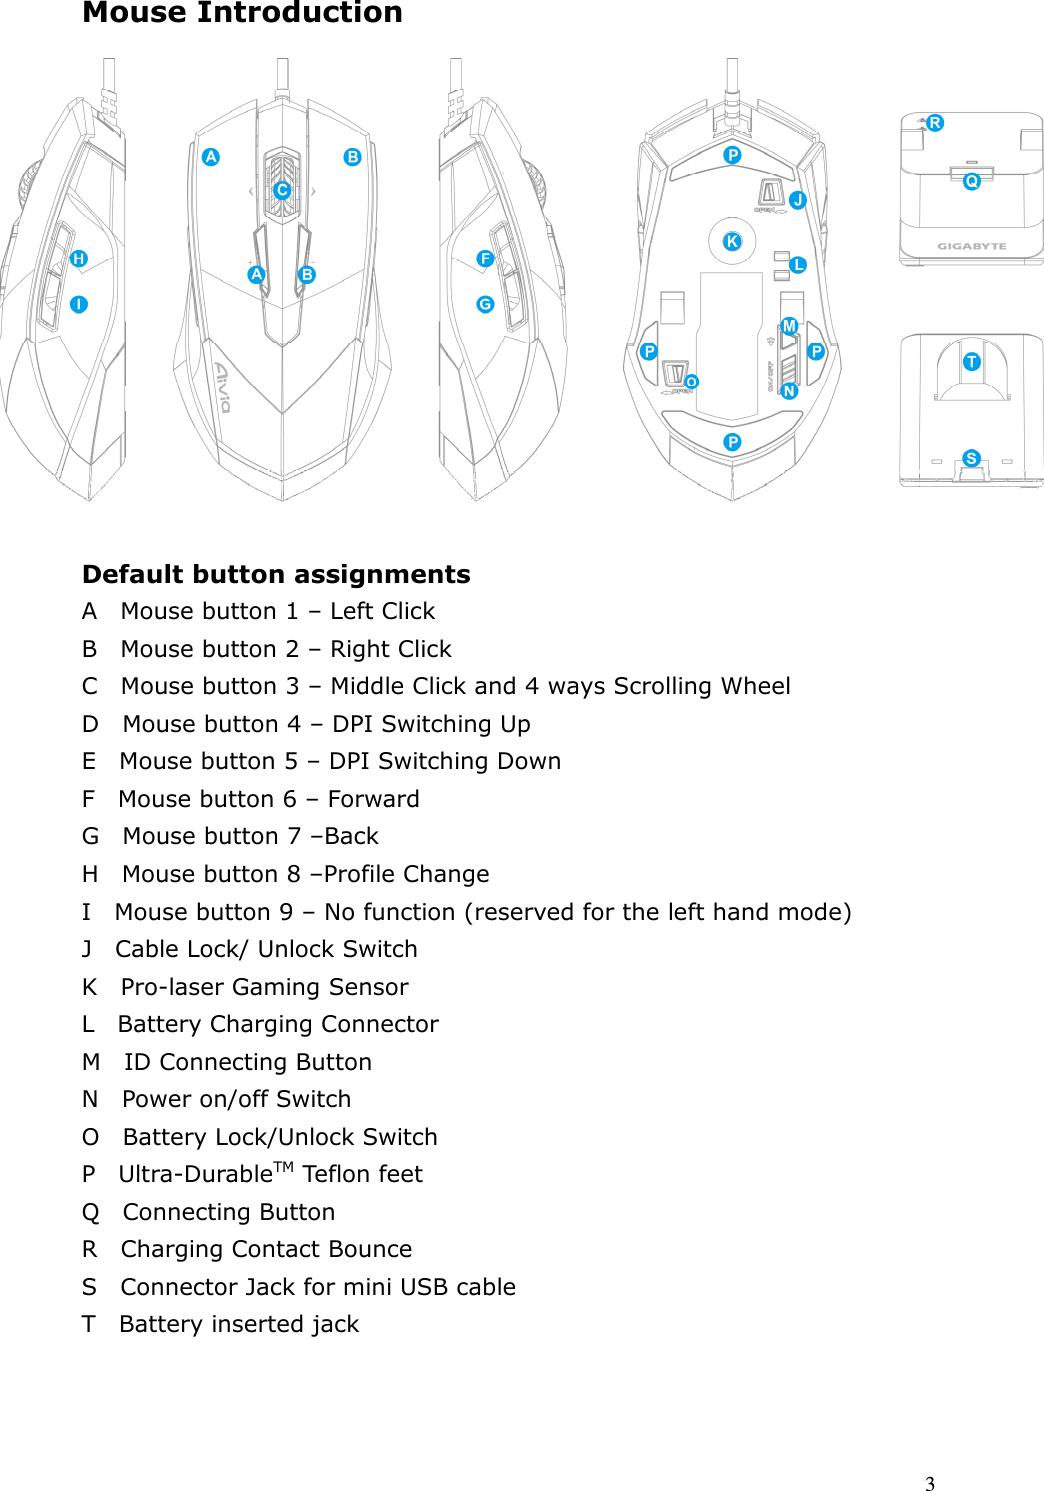  3 Mouse Introduction               Default button assignments A    Mouse button 1 – Left Click B    Mouse button 2 – Right Click C    Mouse button 3 – Middle Click and 4 ways Scrolling Wheel D    Mouse button 4 – DPI Switching Up   E    Mouse button 5 – DPI Switching Down F    Mouse button 6 – Forward G    Mouse button 7 –Back H    Mouse button 8 –Profile Change I    Mouse button 9 – No function (reserved for the left hand mode) J    Cable Lock/ Unlock Switch K    Pro-laser Gaming Sensor L    Battery Charging Connector M    ID Connecting Button   N    Power on/off Switch O    Battery Lock/Unlock Switch P    Ultra-DurableTM Teflon feet Q    Connecting Button R    Charging Contact Bounce S    Connector Jack for mini USB cable T    Battery inserted jack     